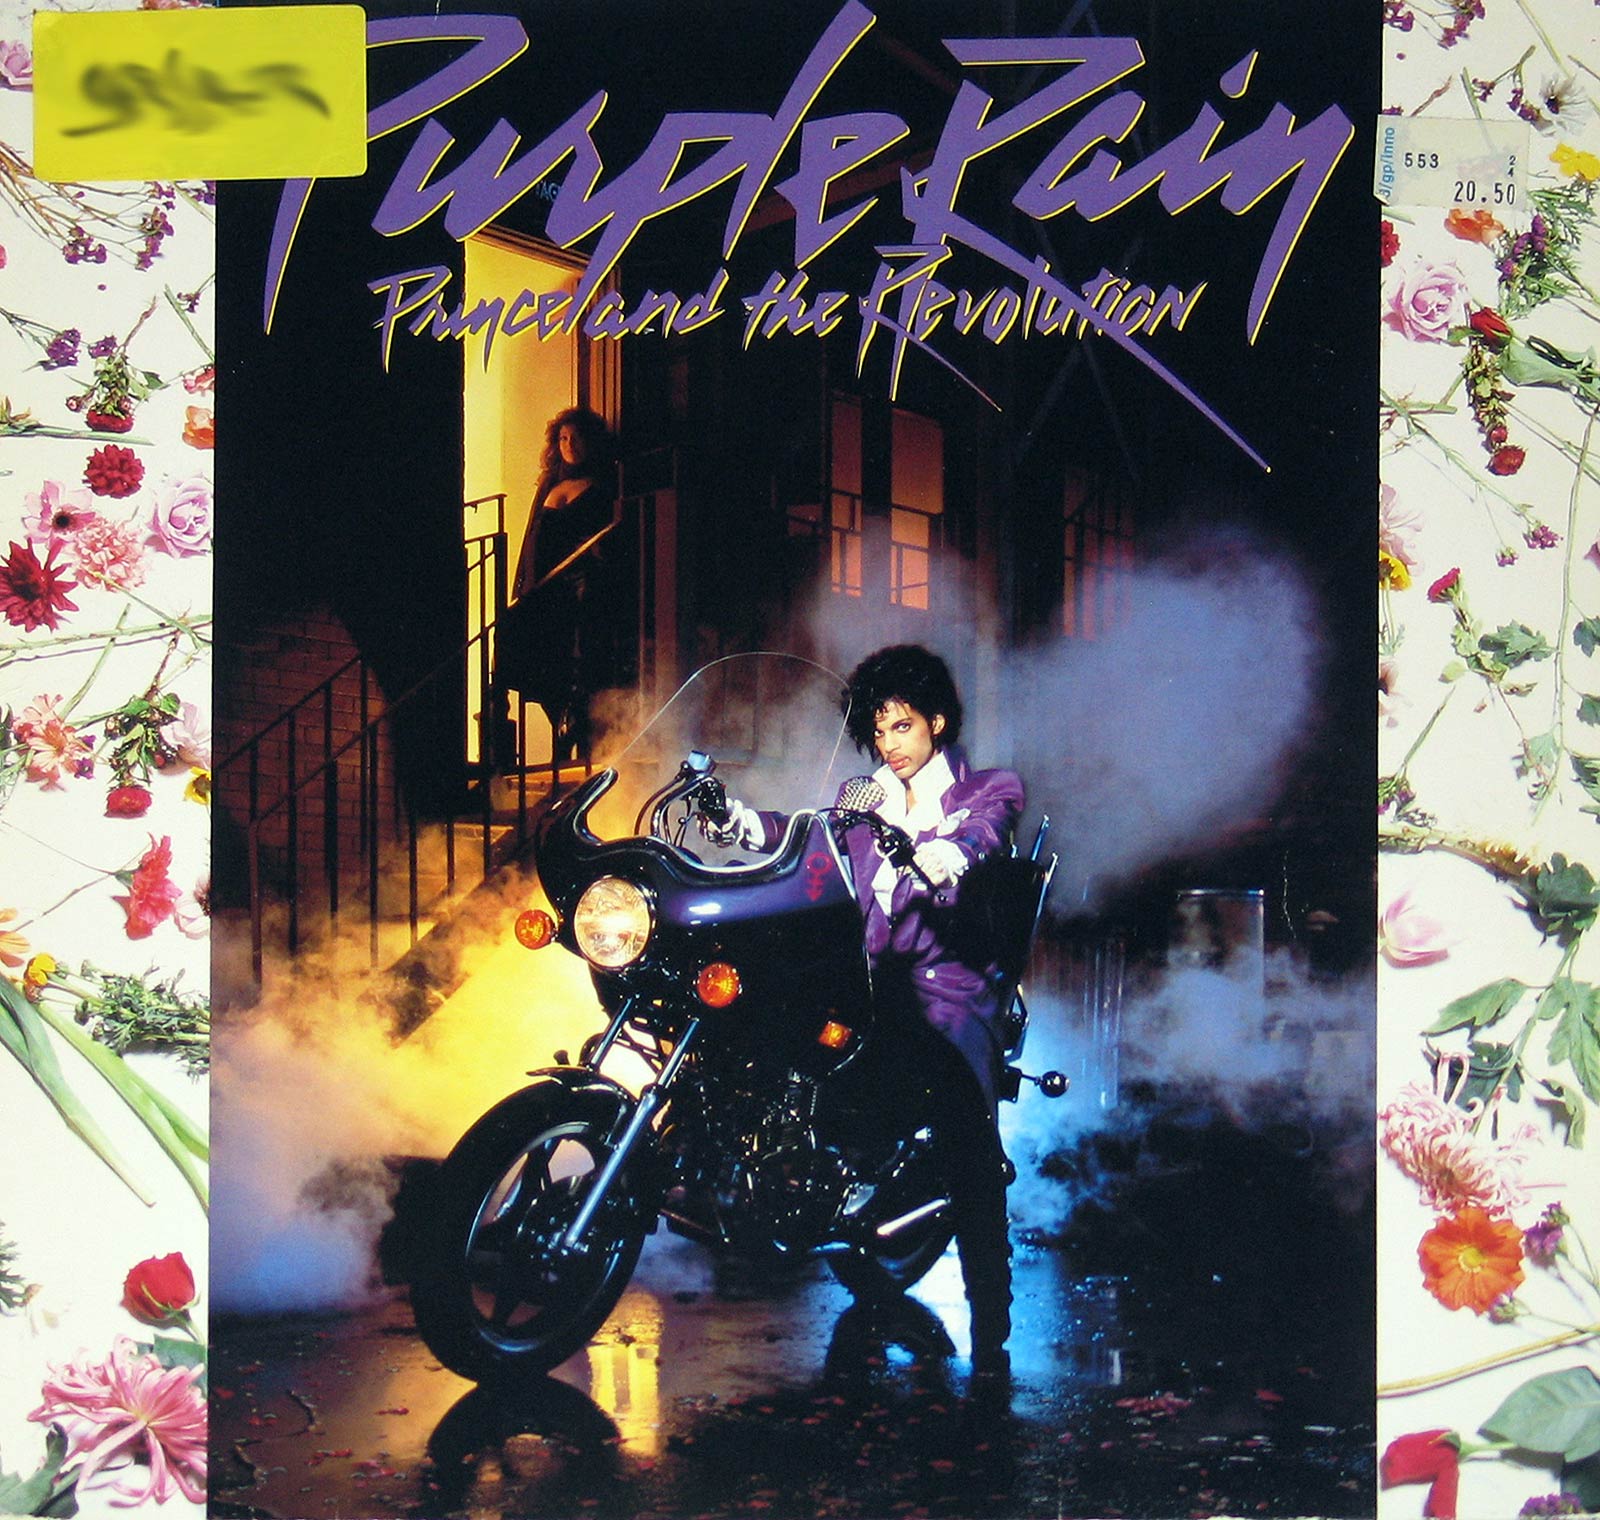 large album front cover photo of: Purple Rain by Prince and the Revolution